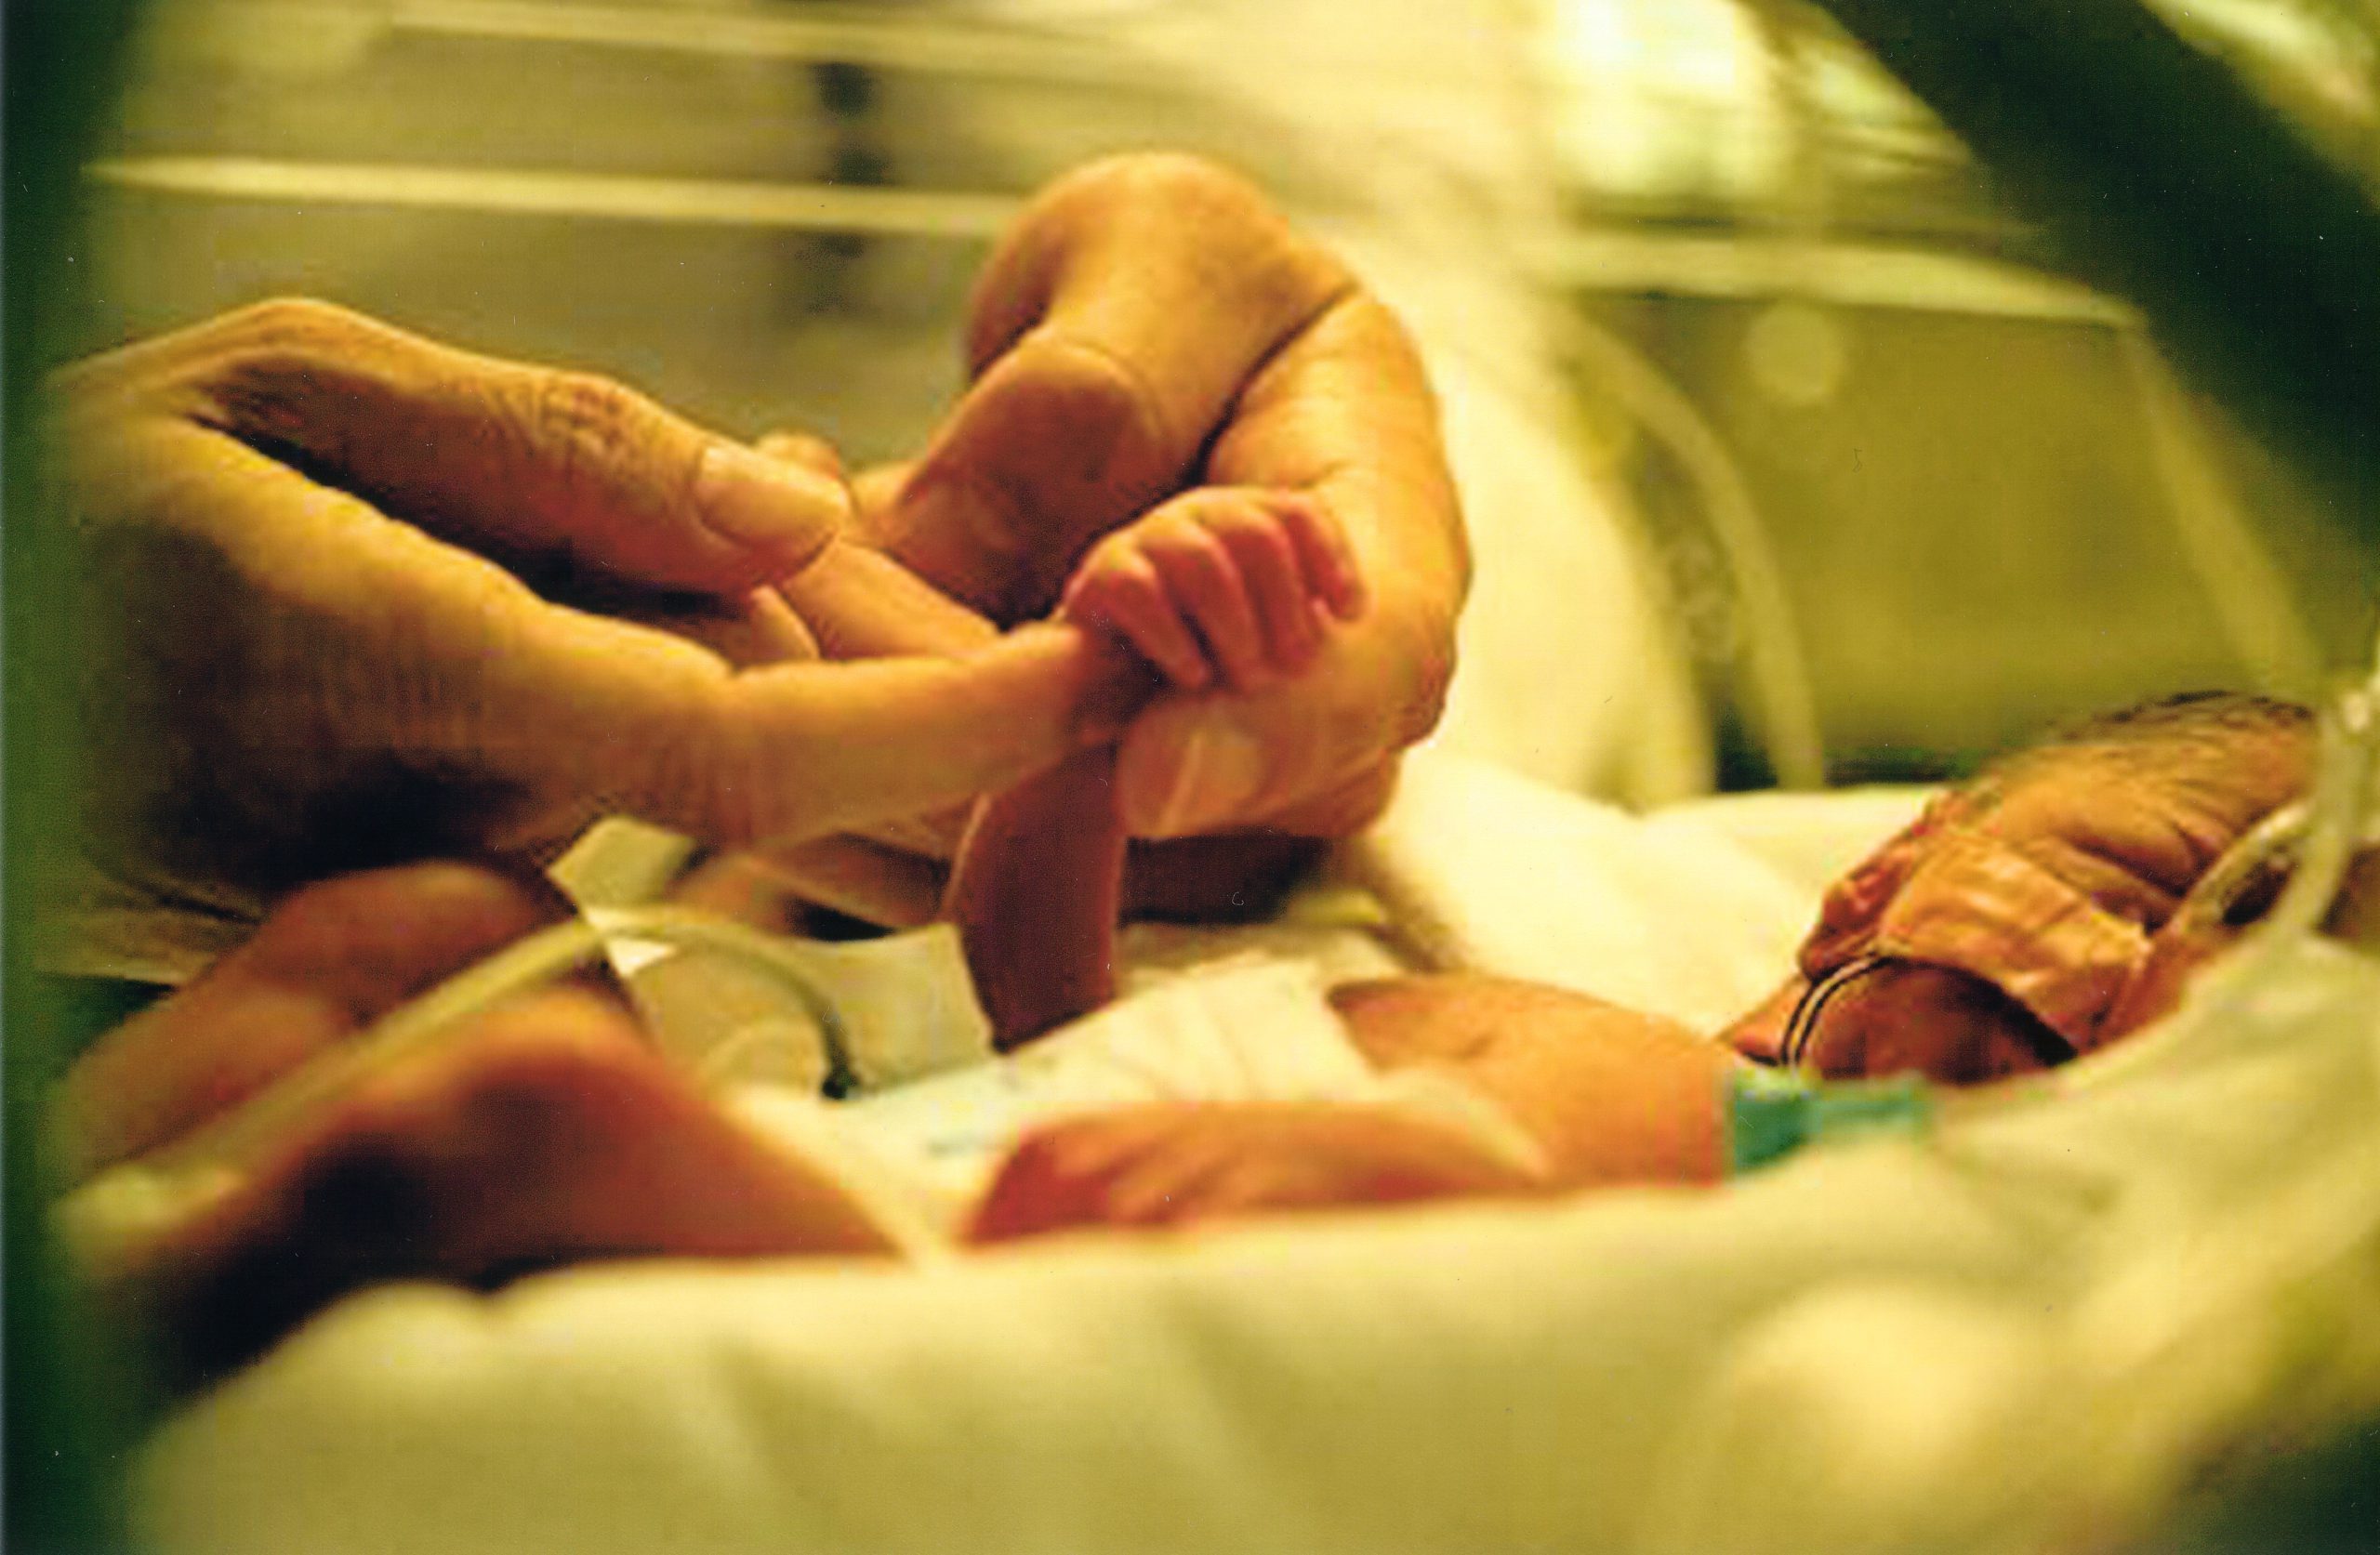 Zach McCarthy as a micro preemie in the CPMC California campus neonatal intensive care unit. An adult's hand holds Zach's tiny arm and hand up. Zach's tiny hand is just barely the size of the adult hand's fingertip. 